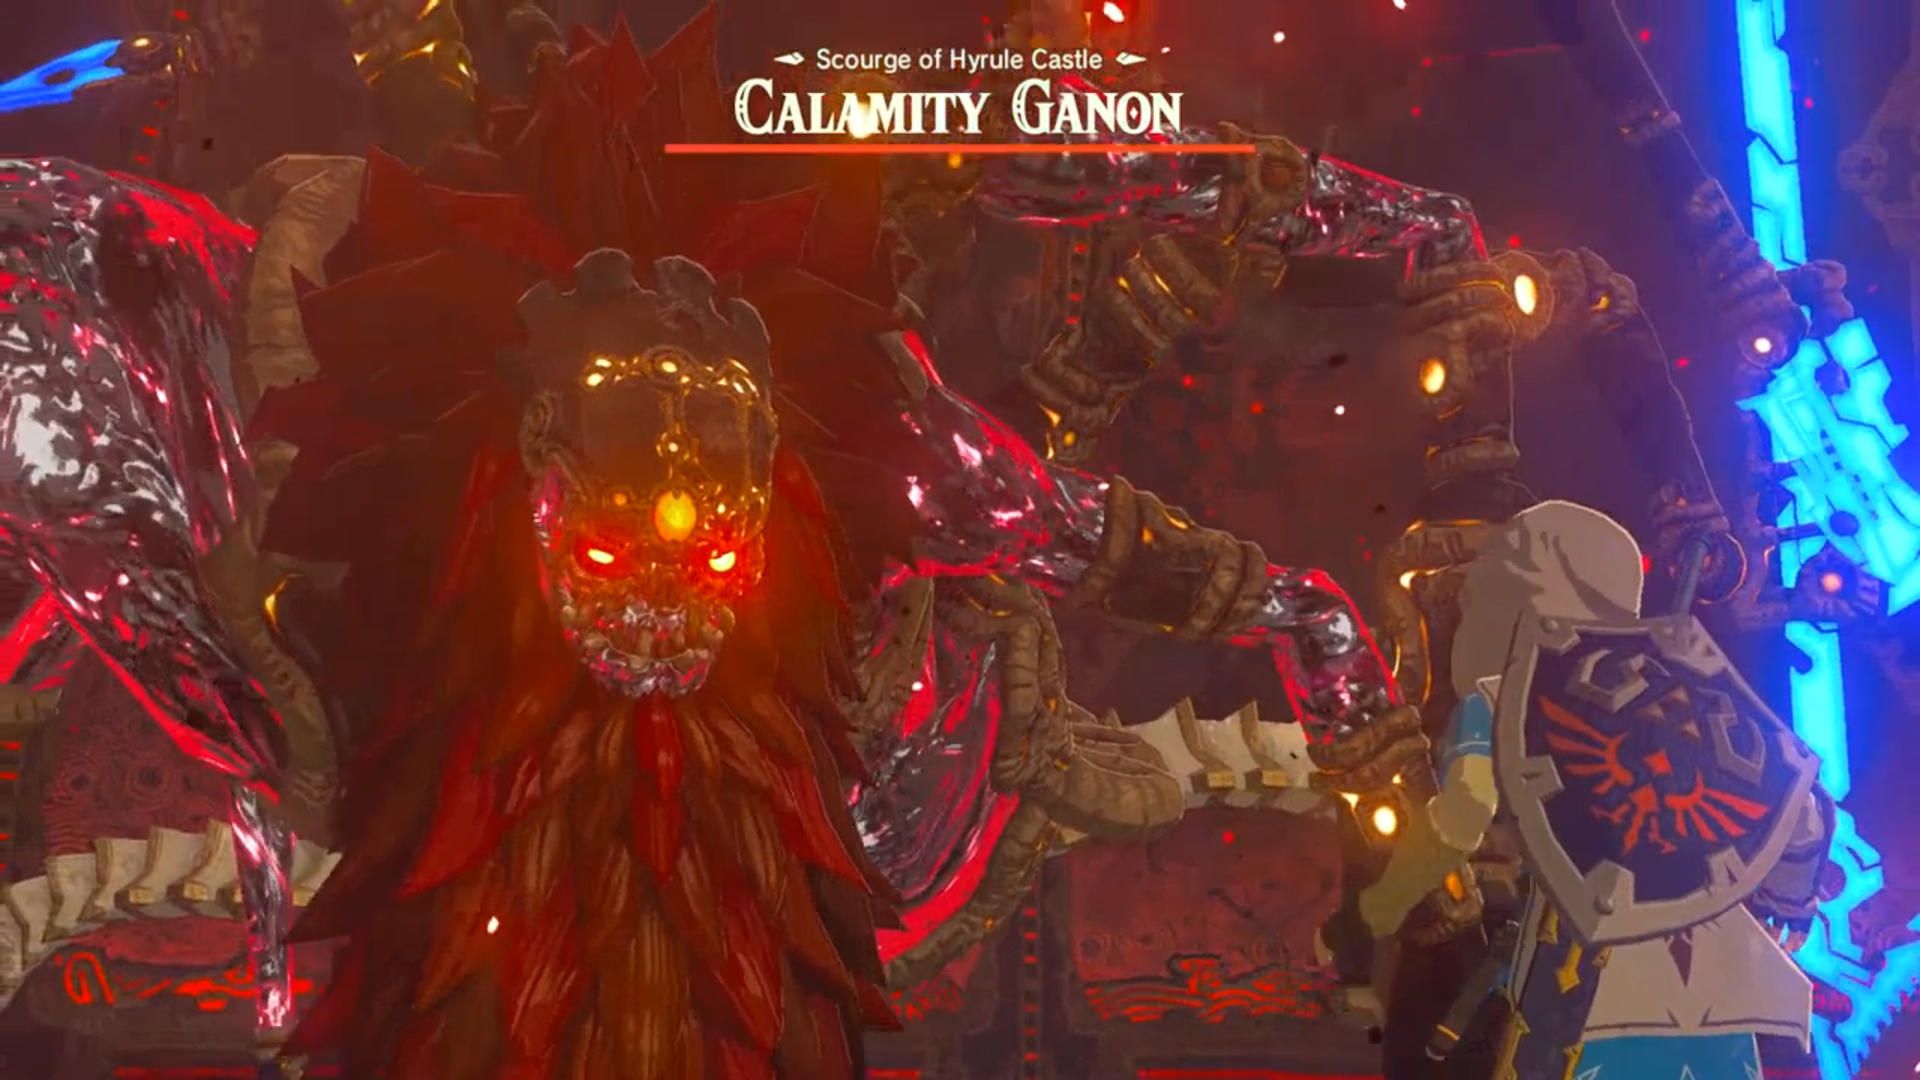 Breath of the Wild Players Have Got the Calamity Ganon Fight Down to 11 Seconds